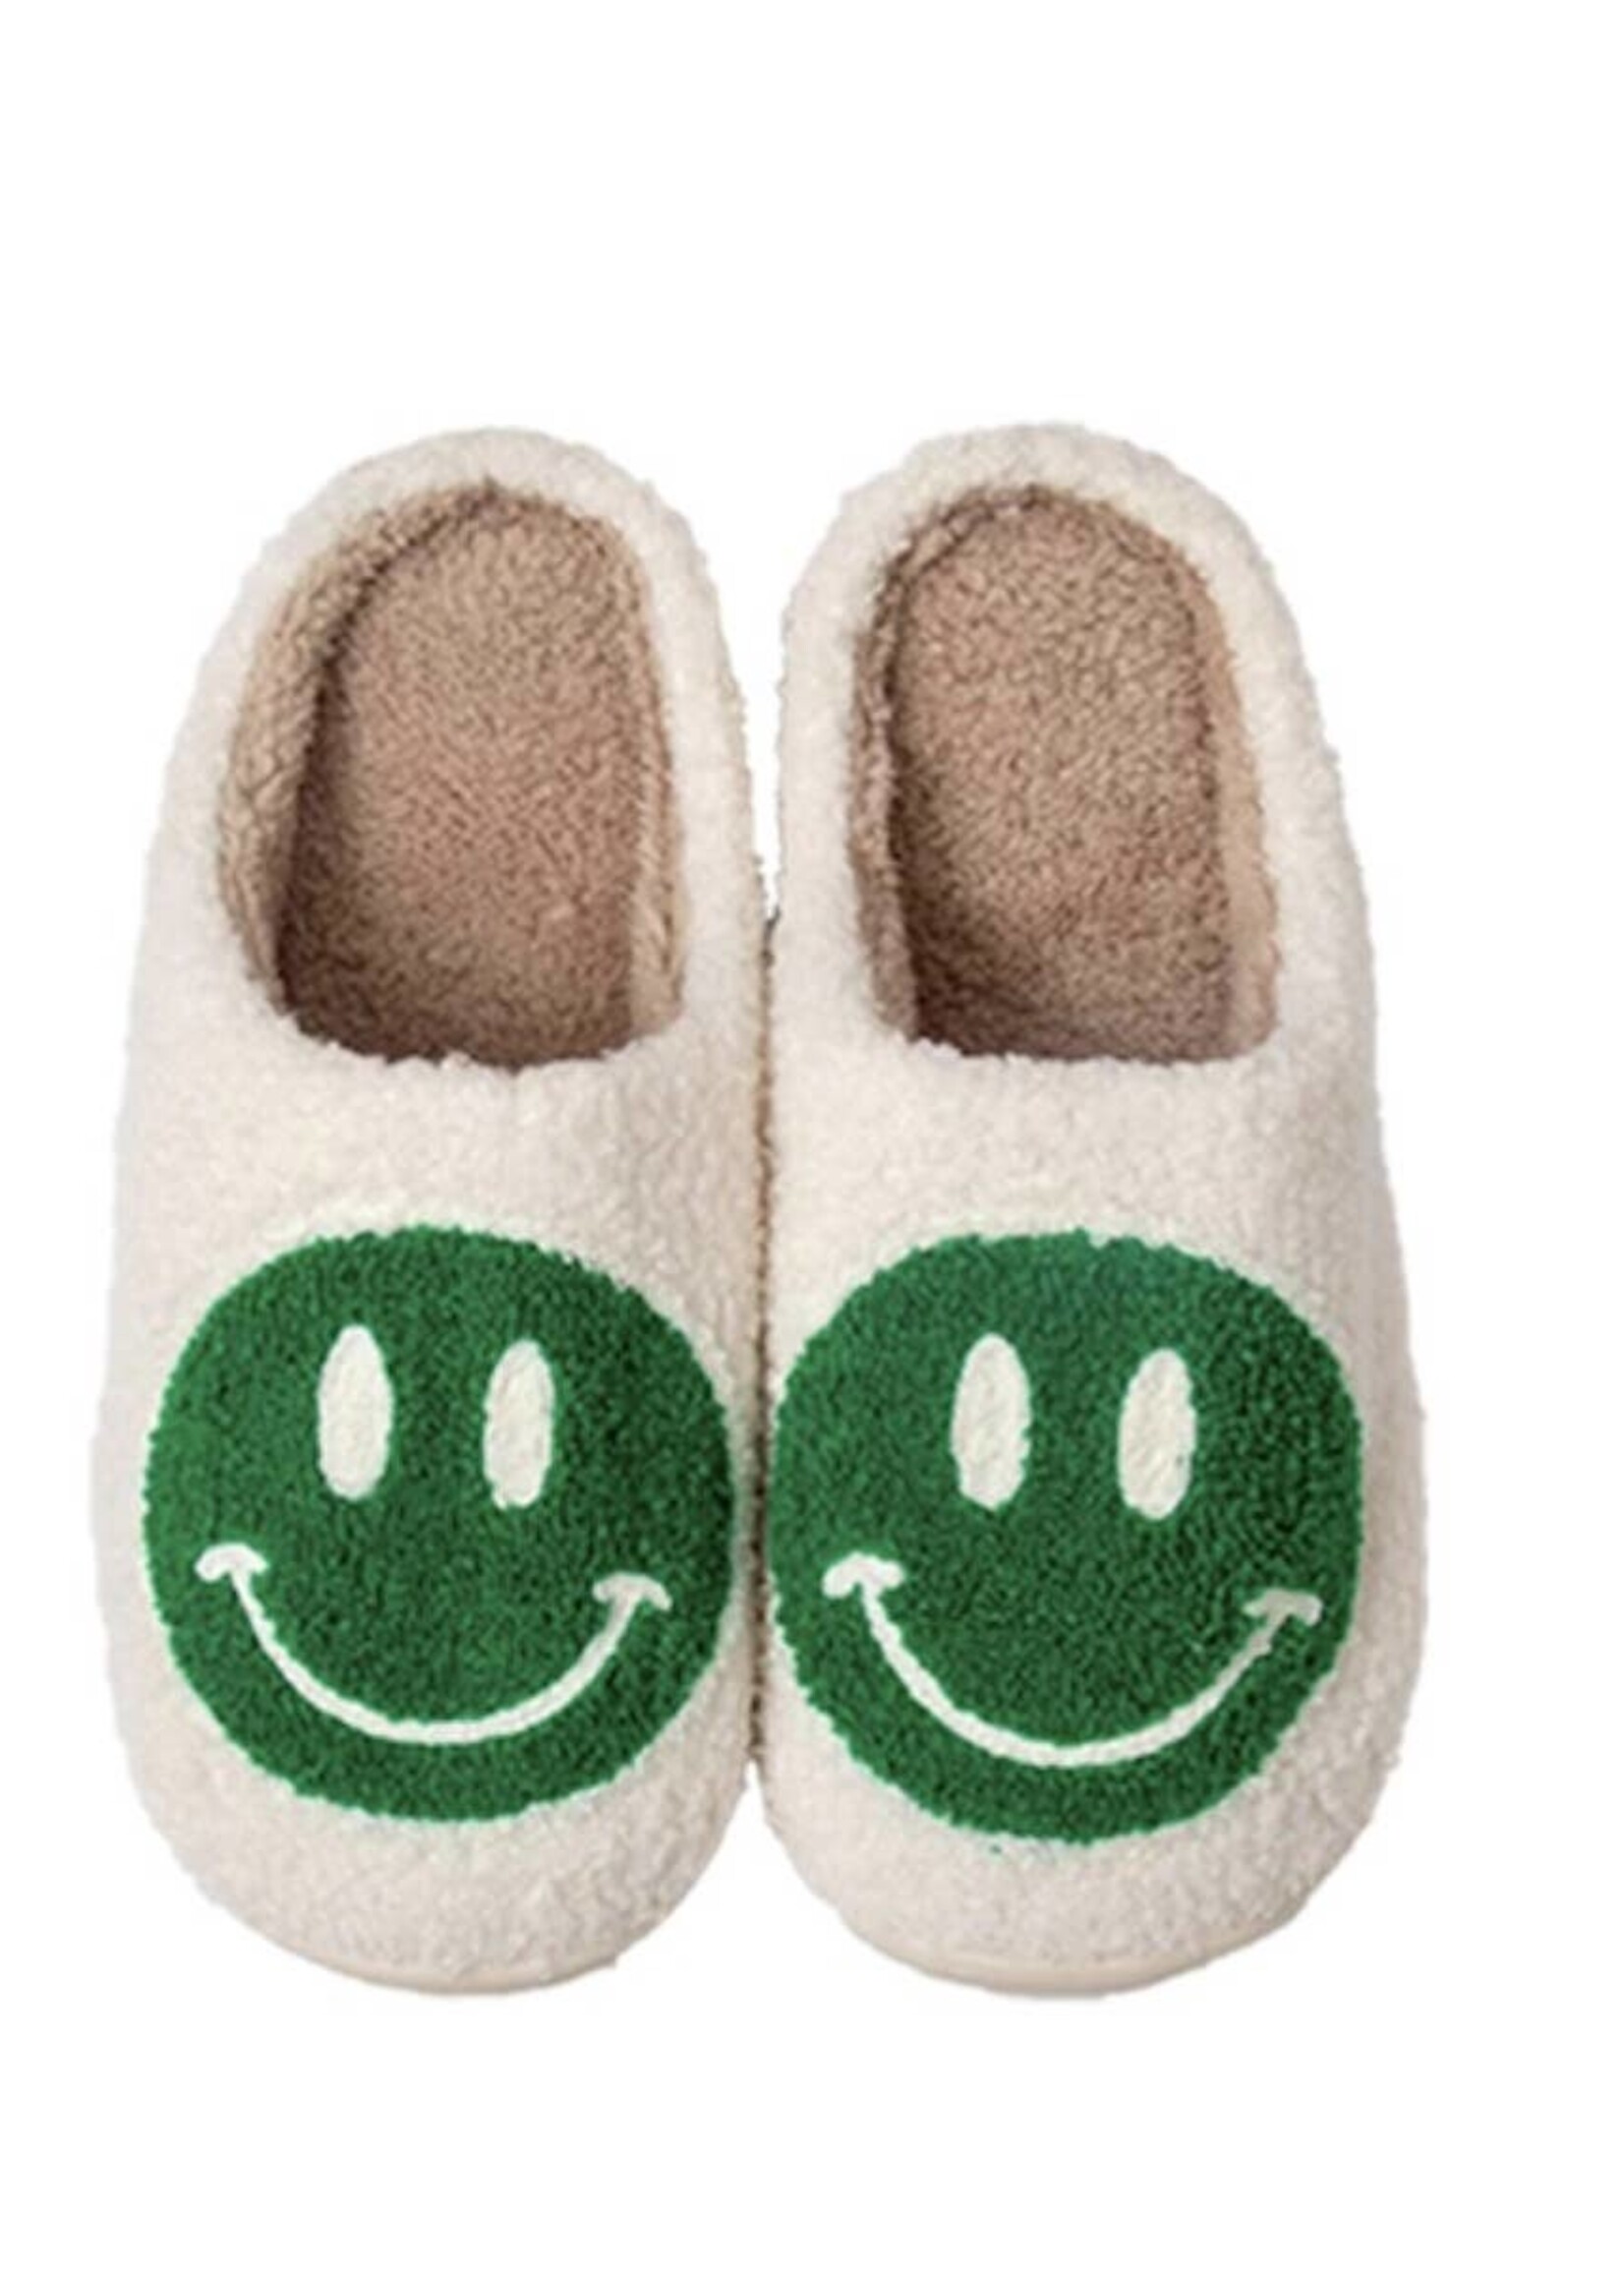 Smile Face Slippers 2